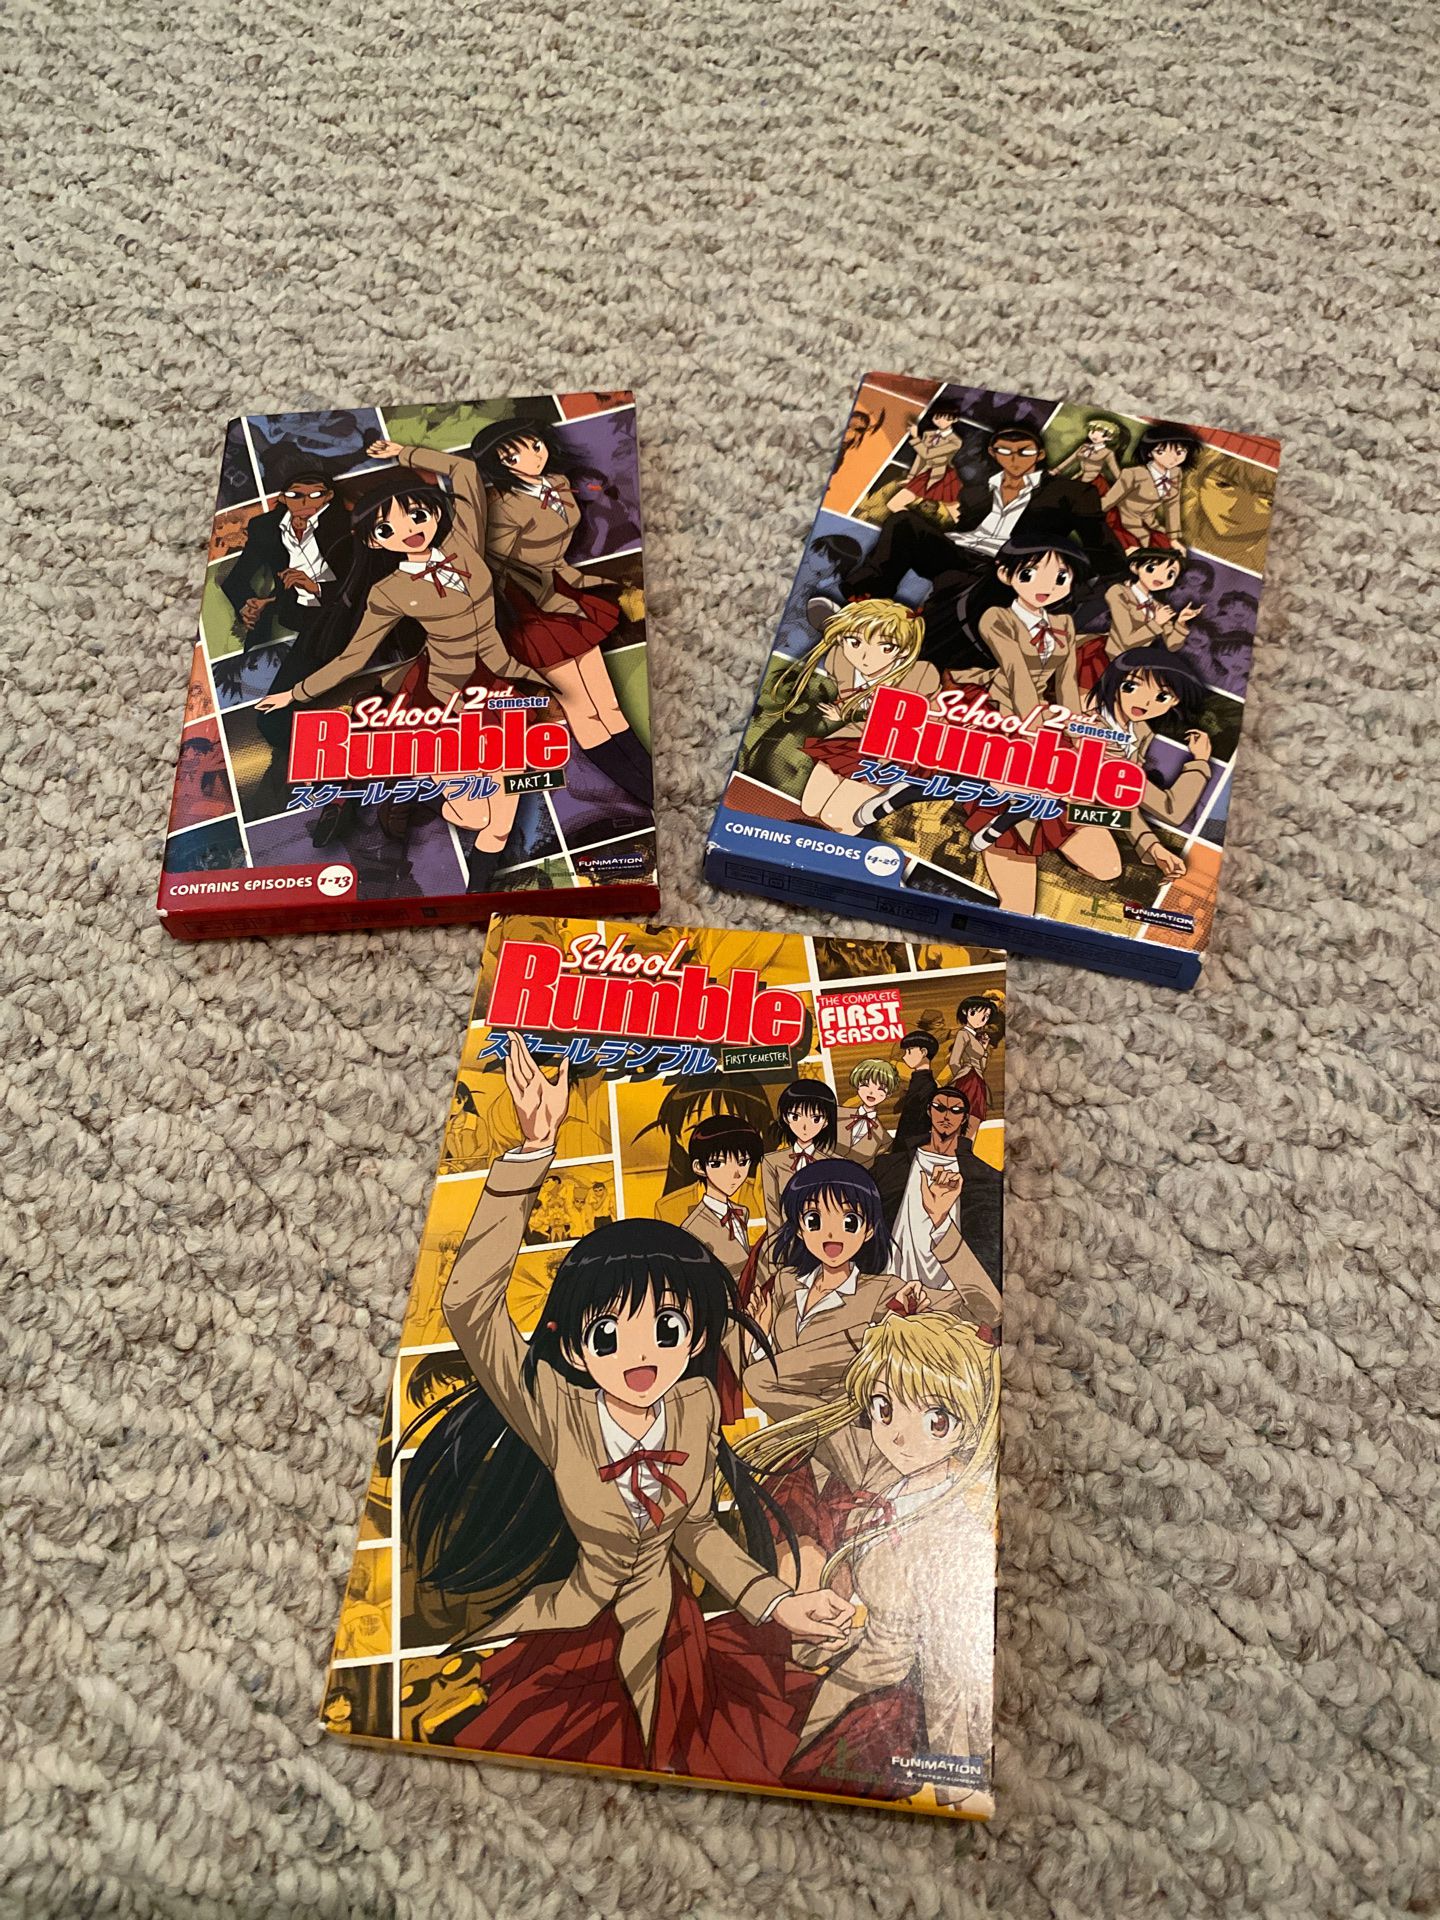 School Rumble (anime) DVDs, 3-boxed sets